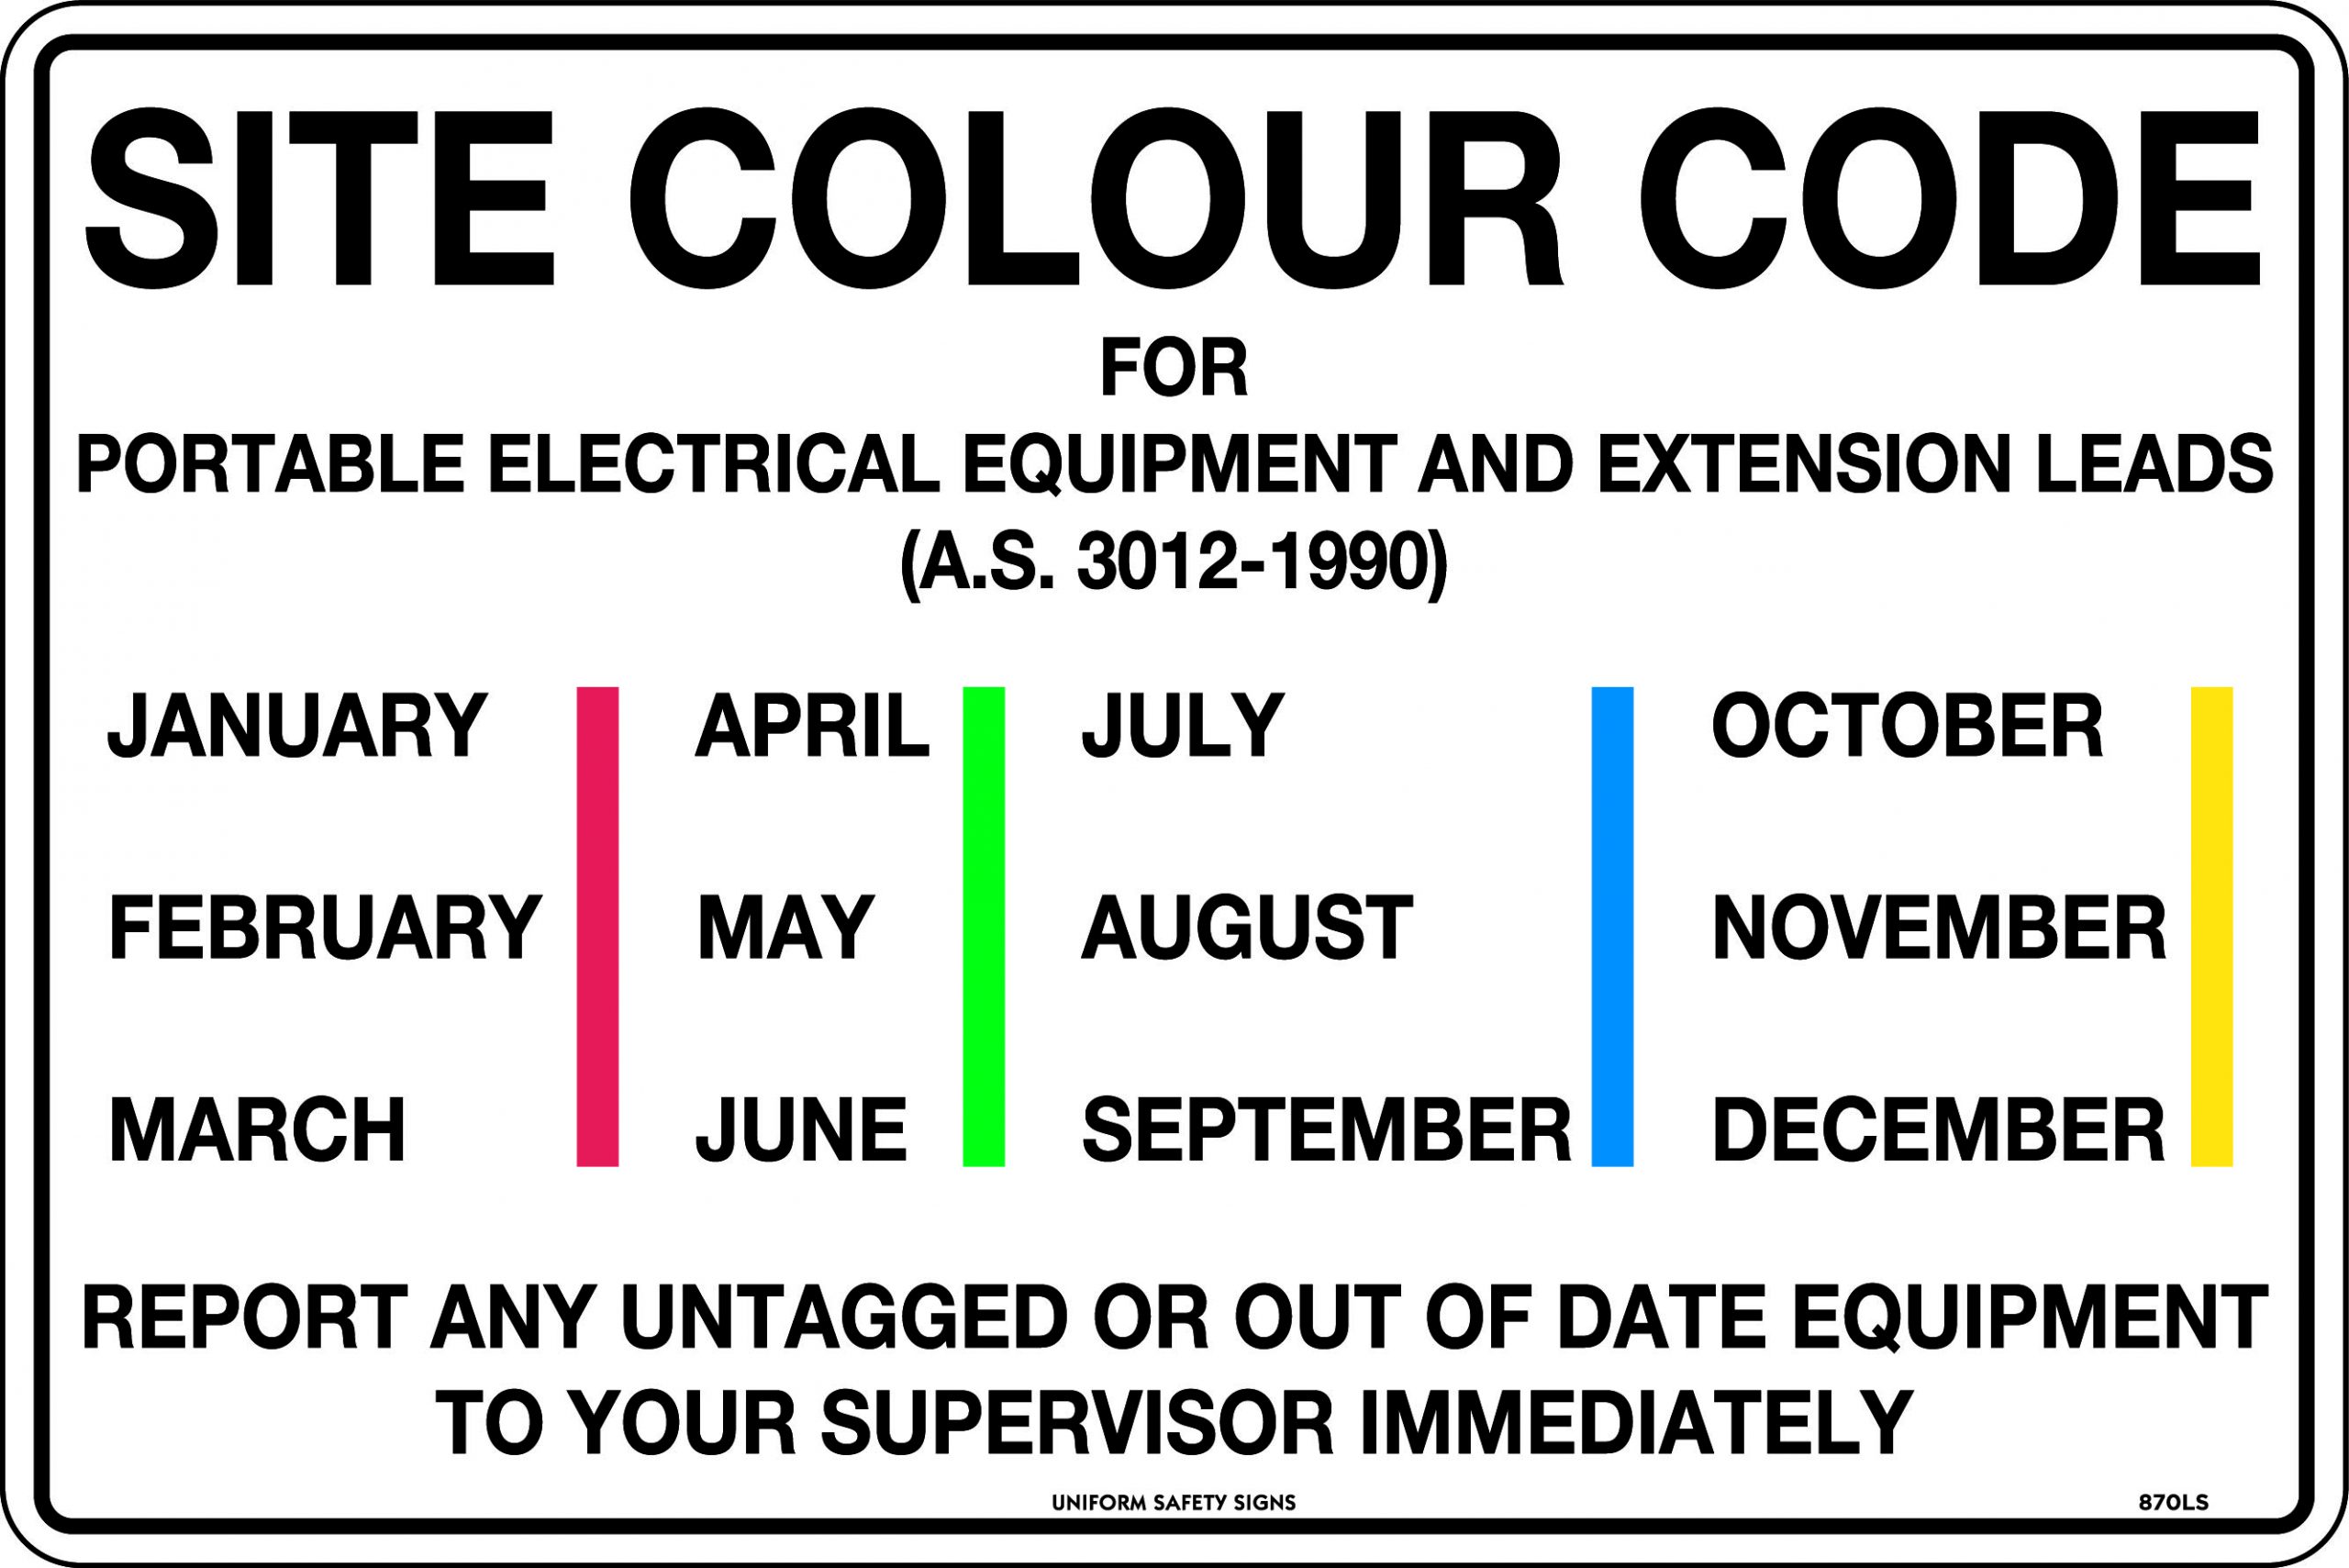 UNIFORM SAFETY 450X300MM POLY SITE COLOUR CODE FOR PORTABLE ELECTRICAL